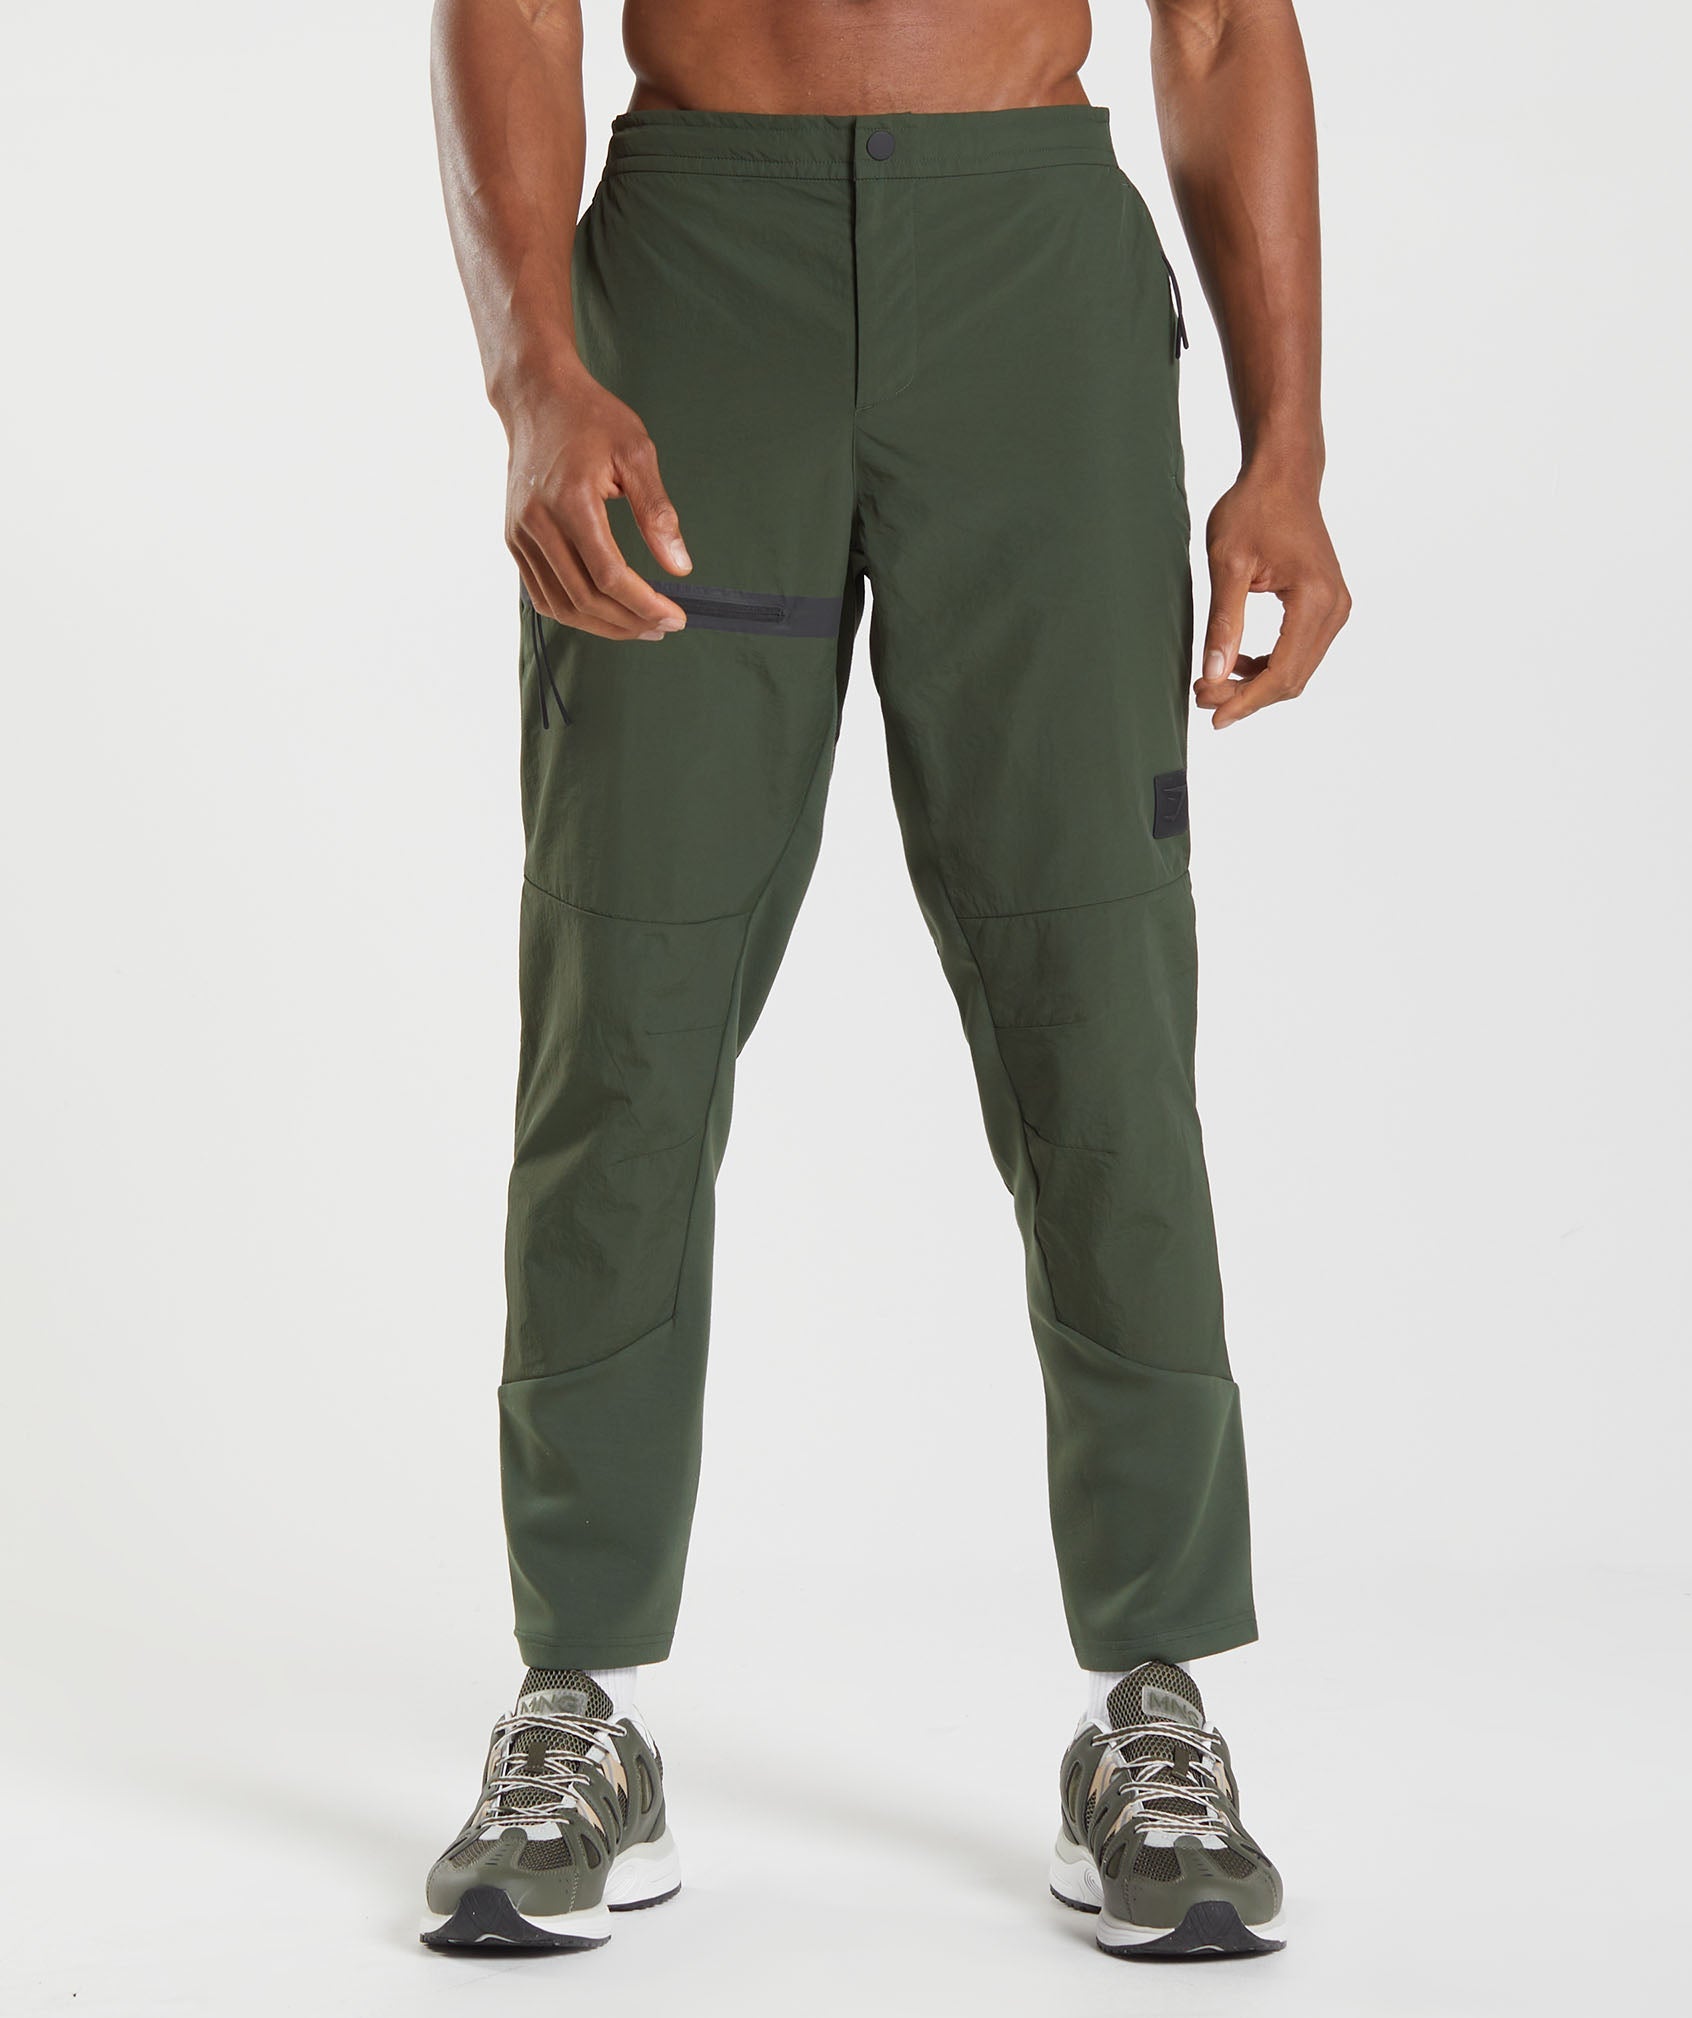 Retake Woven Joggers in Moss Olive